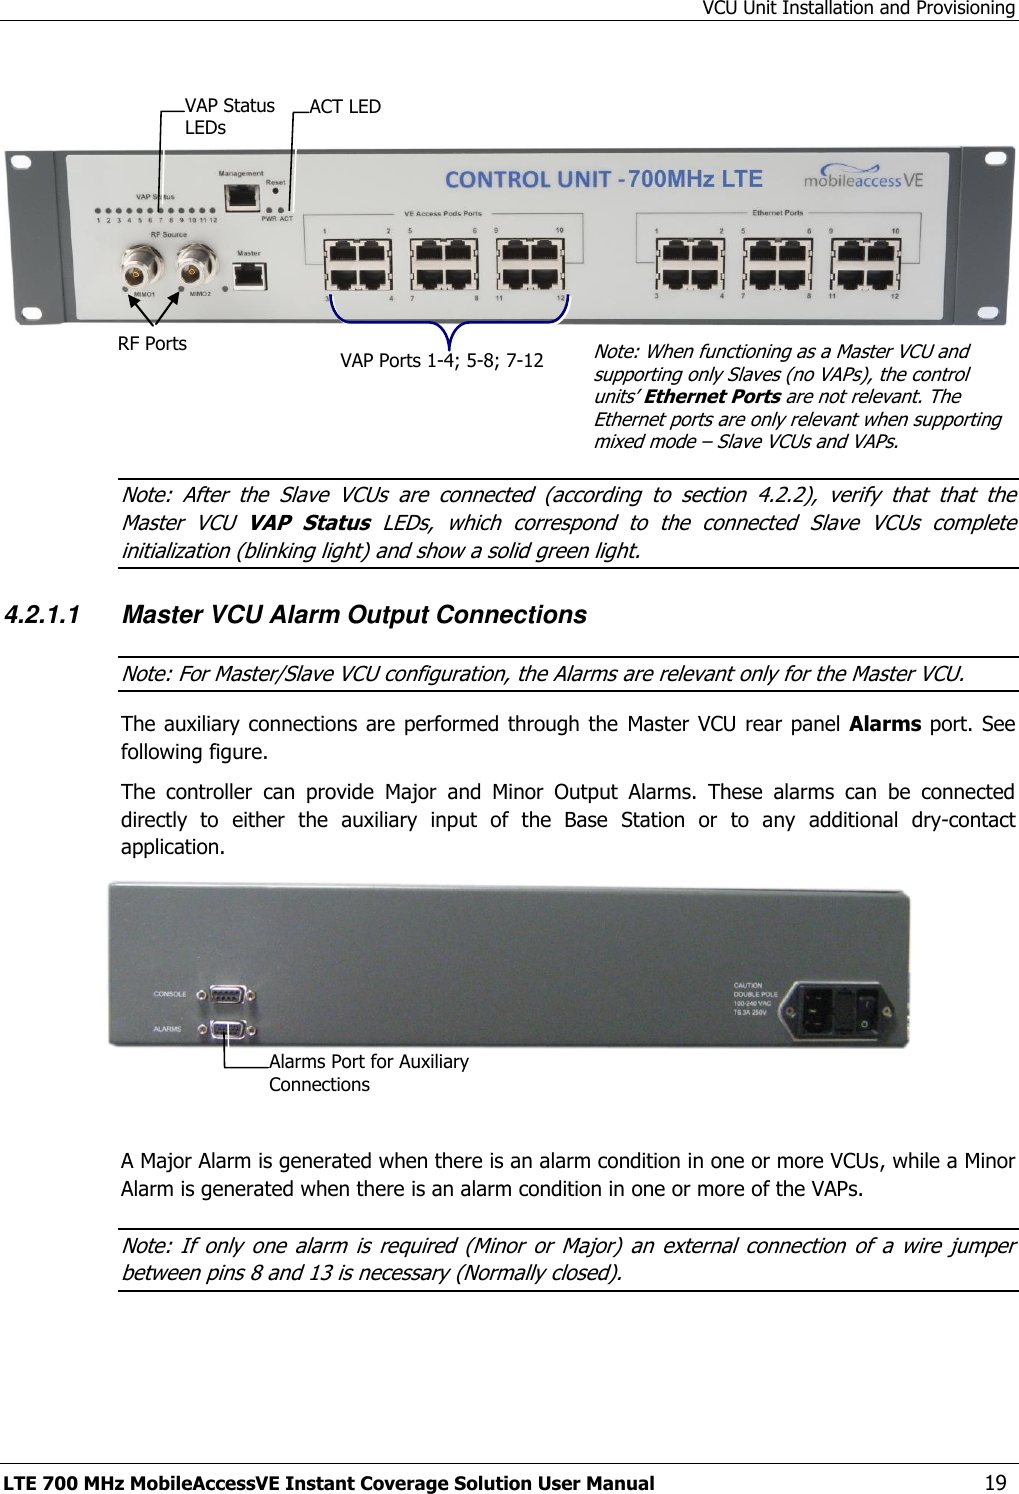 VCU Unit Installation and Provisioning LTE 700 MHz MobileAccessVE Instant Coverage Solution User Manual  19       Note:  After  the  Slave  VCUs  are  connected  (according  to  section  4.2.2),  verify  that  that  the Master  VCU  VAP  Status  LEDs,  which  correspond  to  the  connected  Slave  VCUs  complete initialization (blinking light) and show a solid green light. 4.2.1.1 Master VCU Alarm Output Connections Note: For Master/Slave VCU configuration, the Alarms are relevant only for the Master VCU. The auxiliary connections are performed  through  the  Master VCU  rear panel  Alarms port. See following figure. The  controller  can  provide  Major  and  Minor  Output  Alarms.  These  alarms  can  be  connected directly  to  either  the  auxiliary  input  of  the  Base  Station  or  to  any  additional  dry-contact application.    A Major Alarm is generated when there is an alarm condition in one or more VCUs, while a Minor Alarm is generated when there is an alarm condition in one or more of the VAPs. Note: If  only  one  alarm  is  required  (Minor  or  Major)  an  external  connection  of  a  wire  jumper between pins 8 and 13 is necessary (Normally closed). RF Ports  Note: When functioning as a Master VCU and supporting only Slaves (no VAPs), the control units’ Ethernet Ports are not relevant. The Ethernet ports are only relevant when supporting mixed mode – Slave VCUs and VAPs. VAP Ports 1-4; 5-8; 7-12 ACT LED  VAP Status LEDs Alarms Port for Auxiliary Connections  